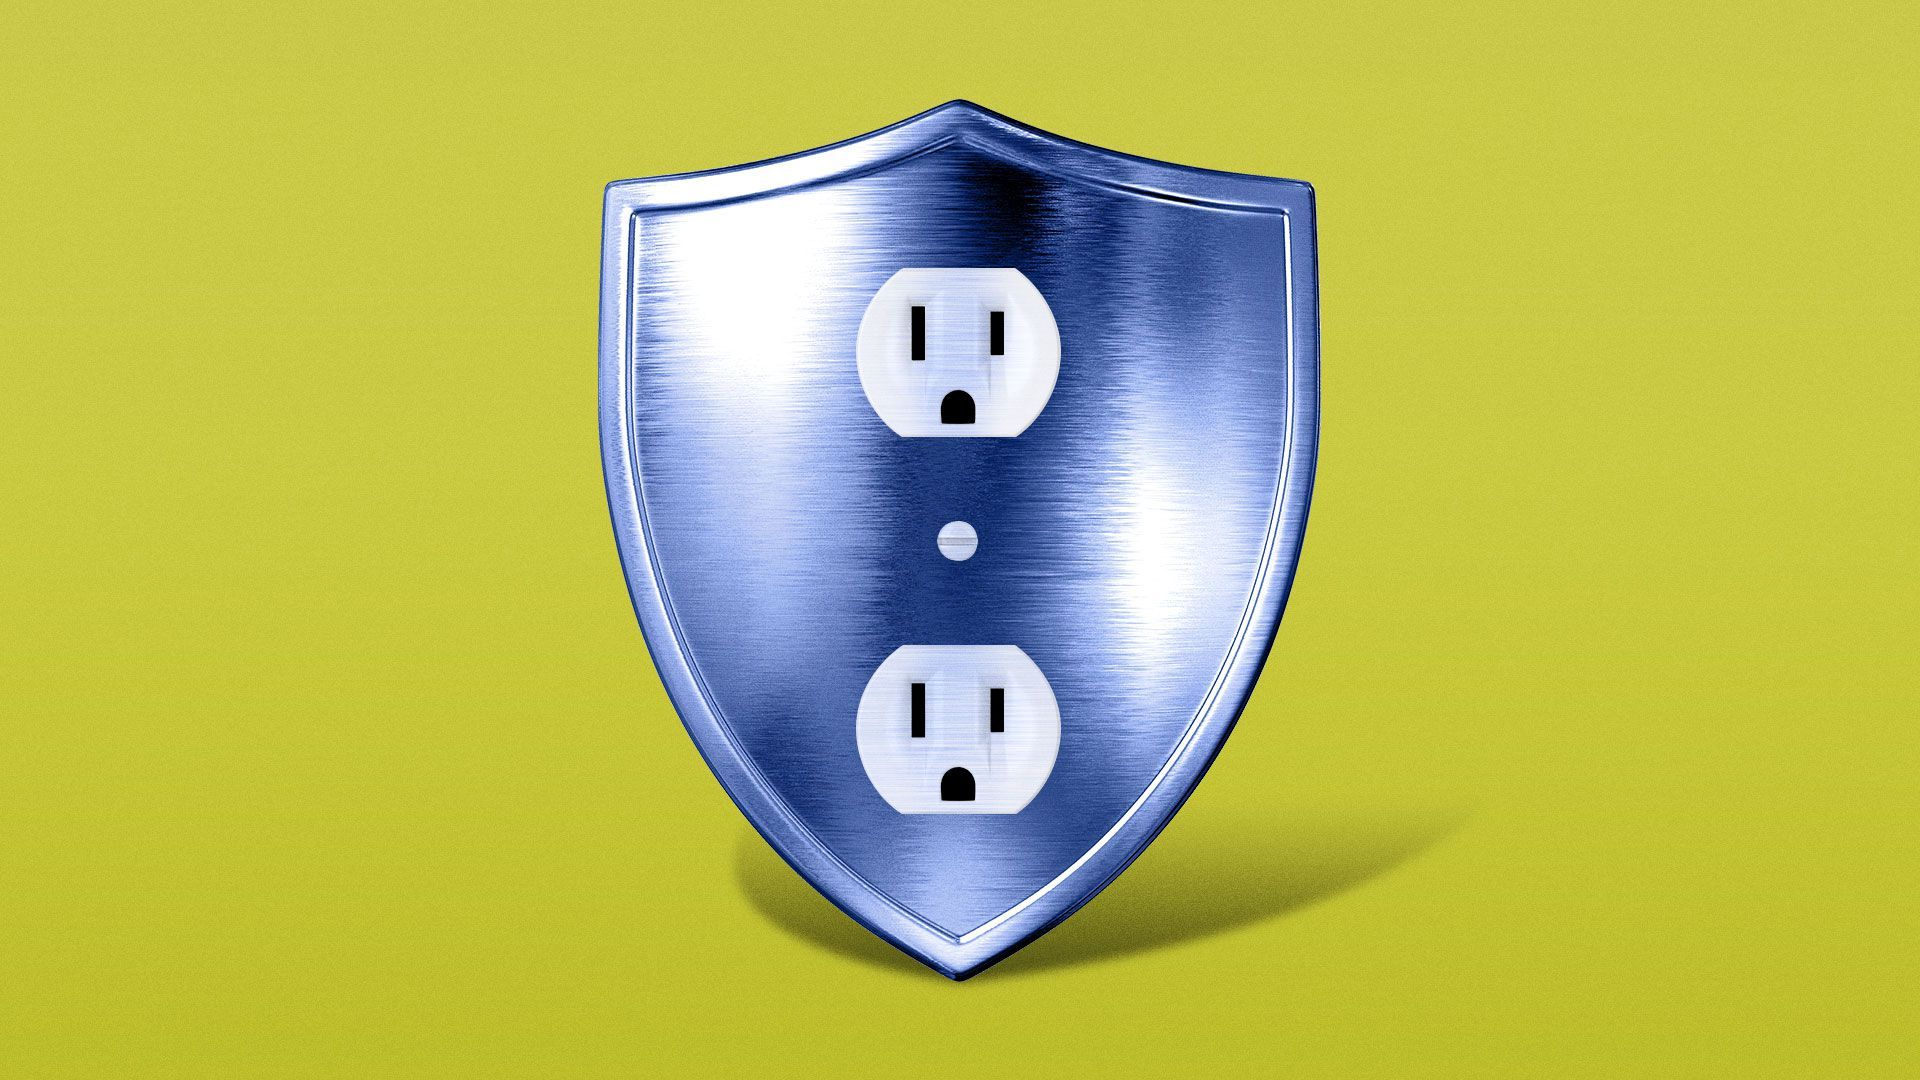 Illustration of a shield electrical outlet